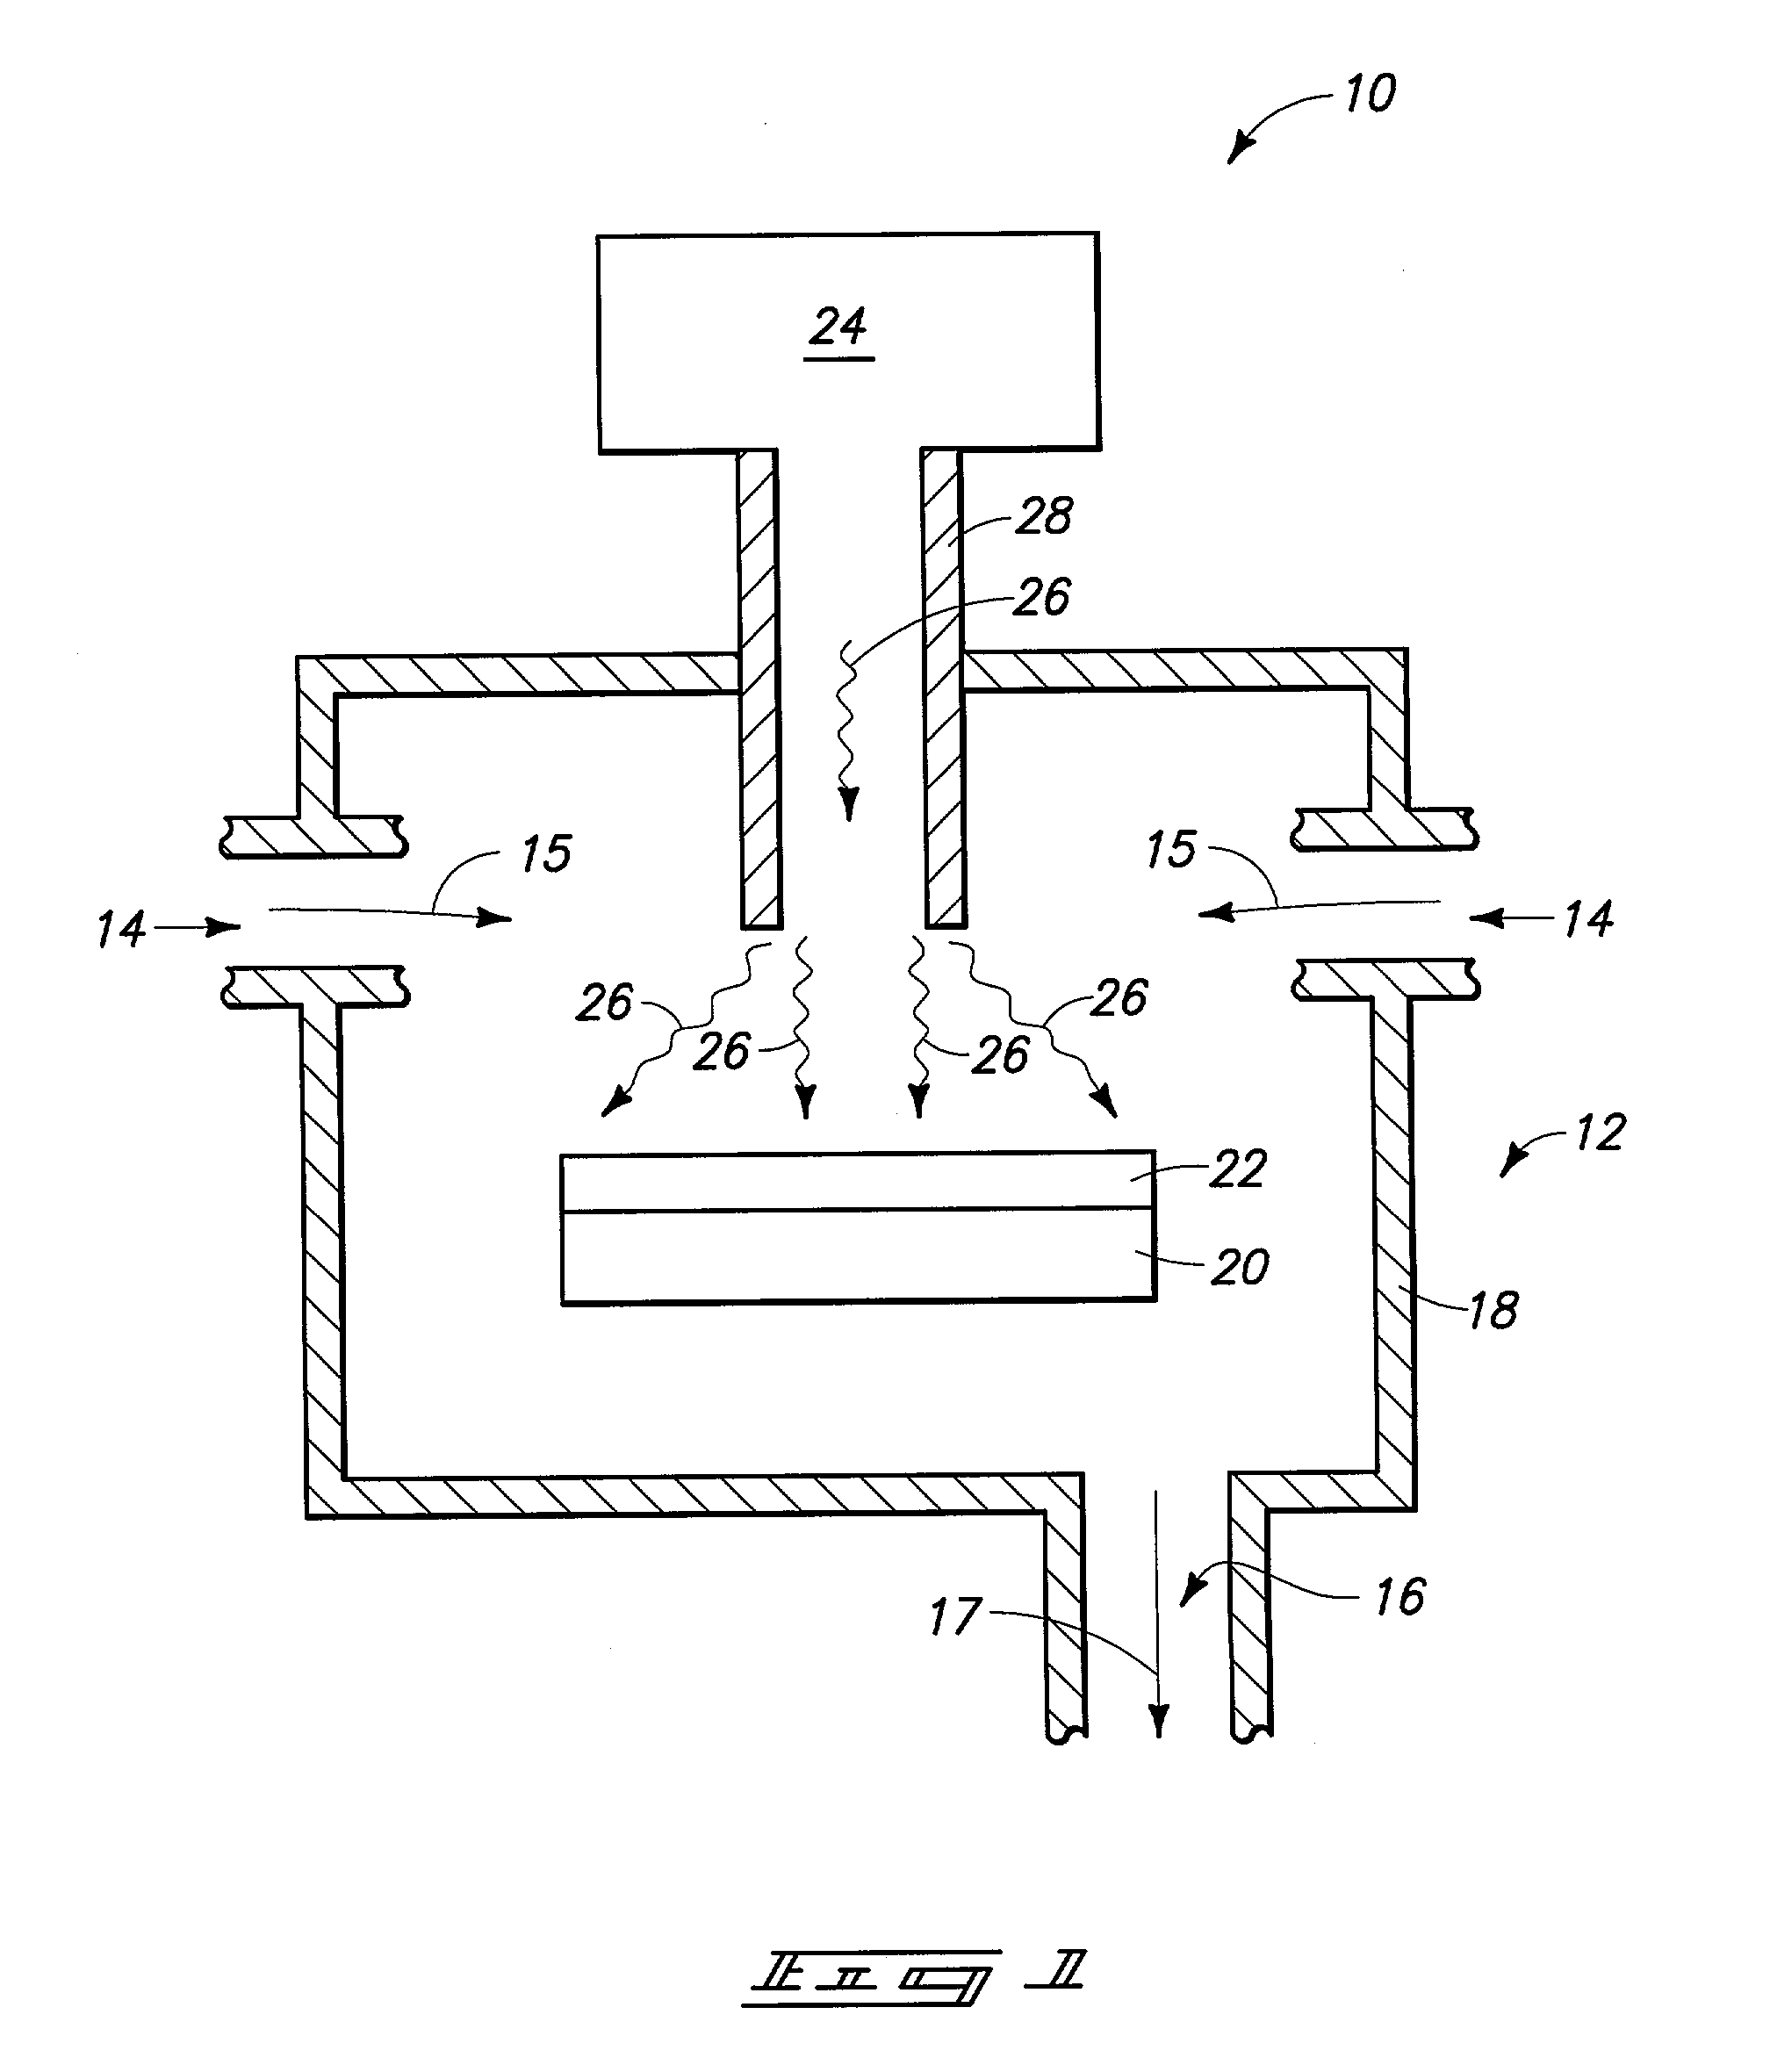 Atomic layer deposition methods and chemical vapor deposition methods